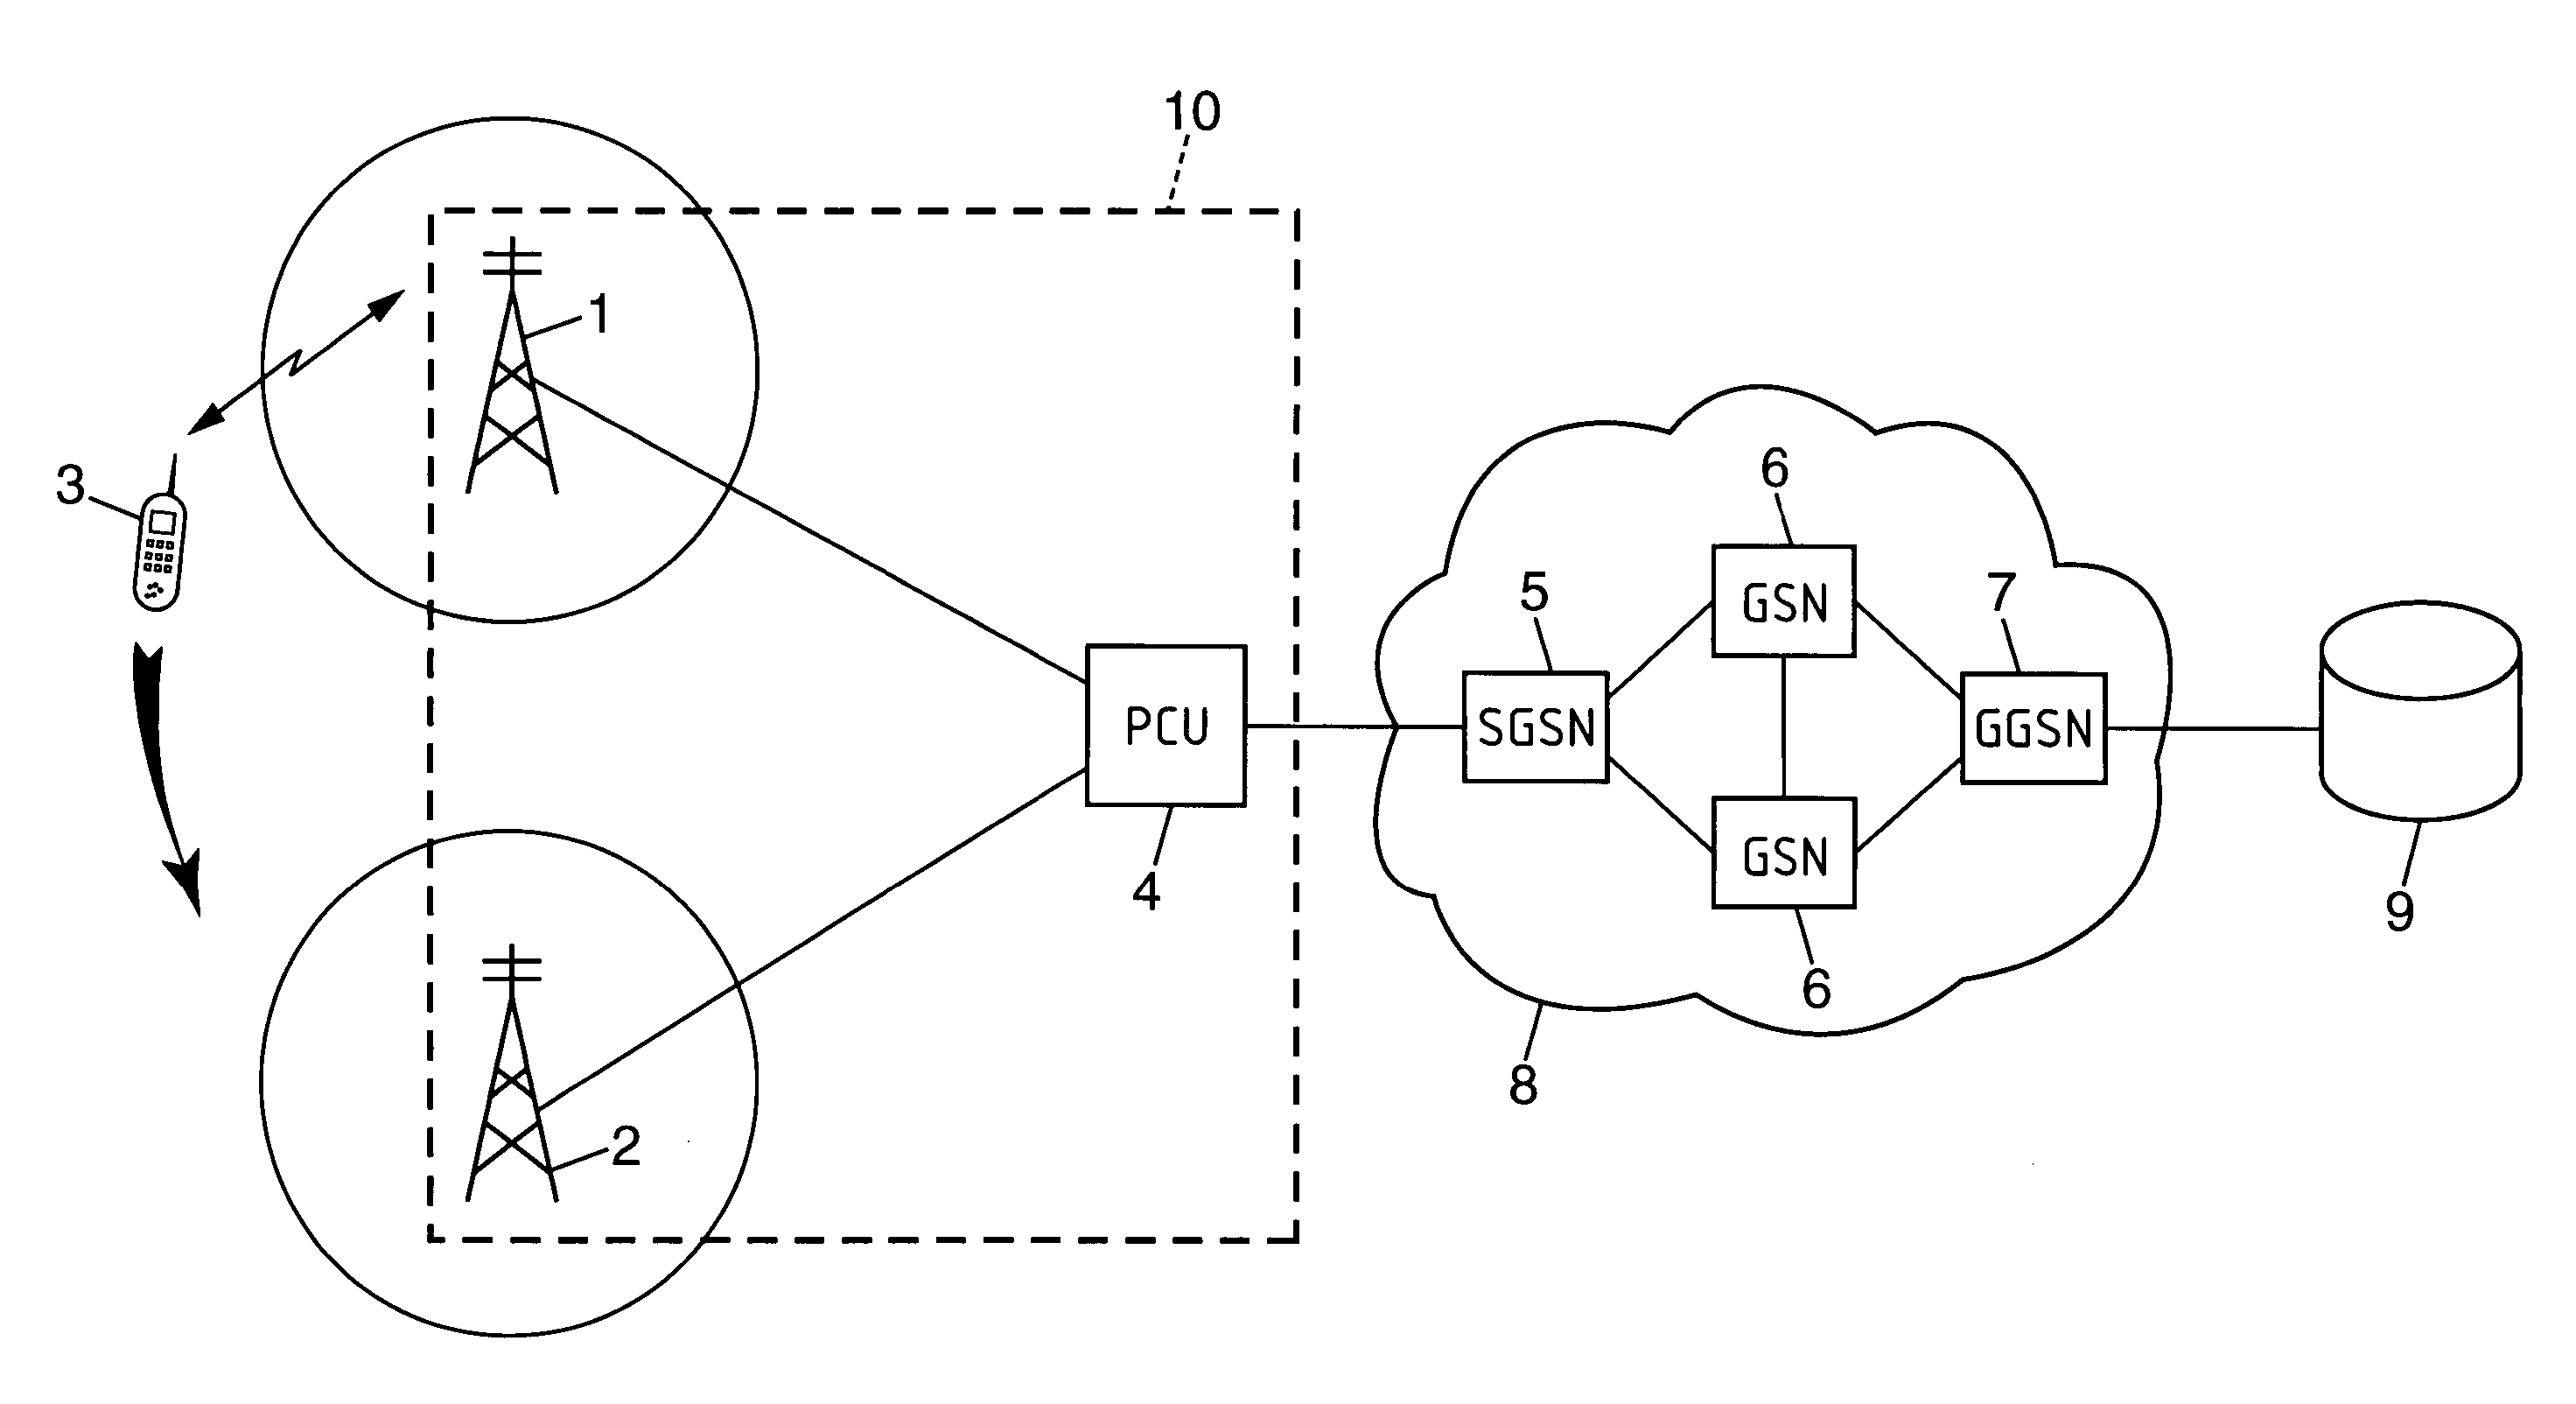 Method of controlling transmission of data and a control unit for implementing the method